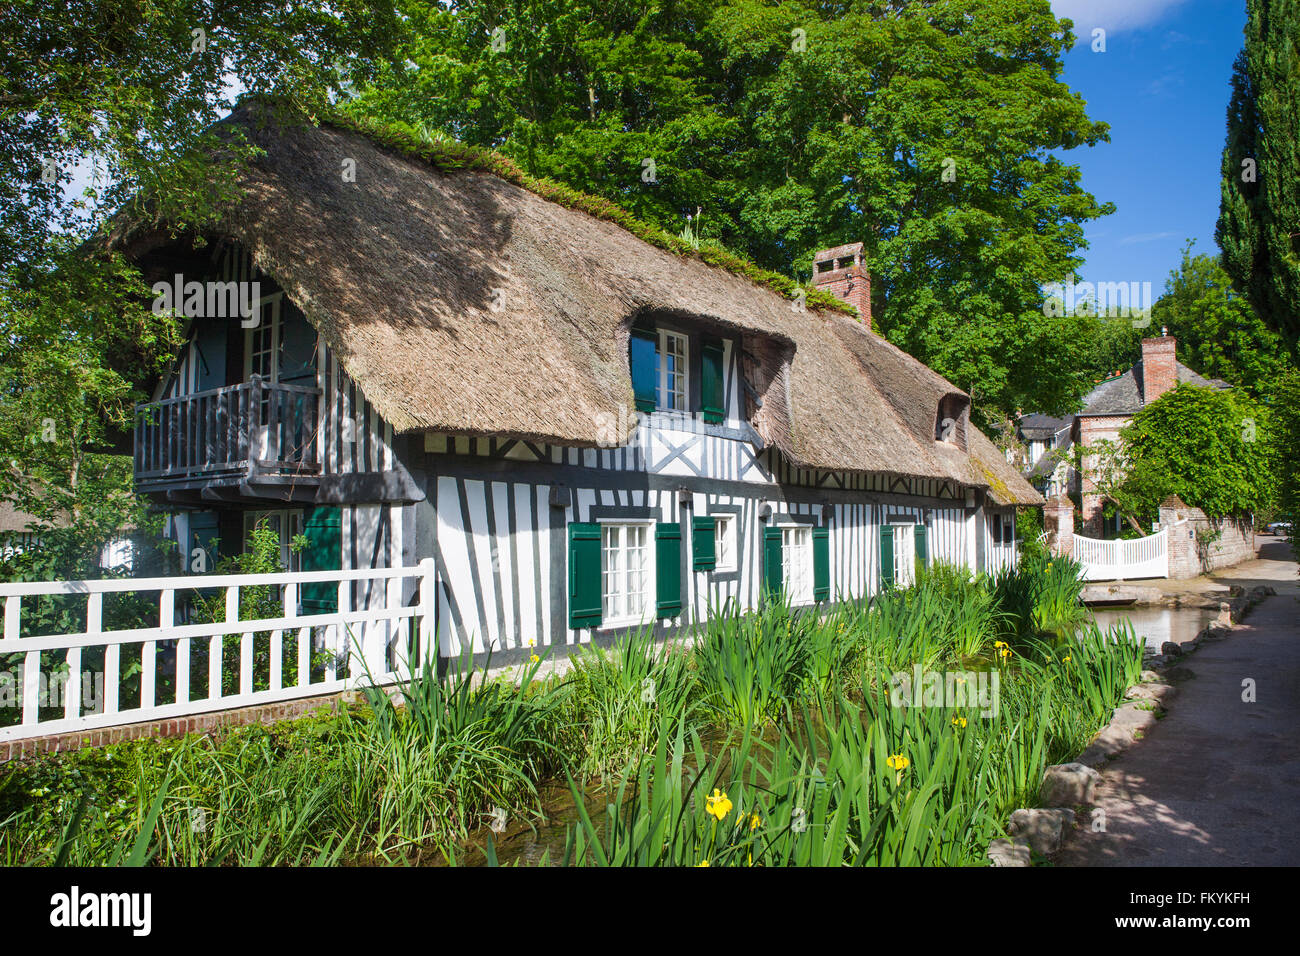 Tudor style house along the river Veules, Veules-les-Roses, Seine-Maritime, Upper Normandy, France Stock Photo